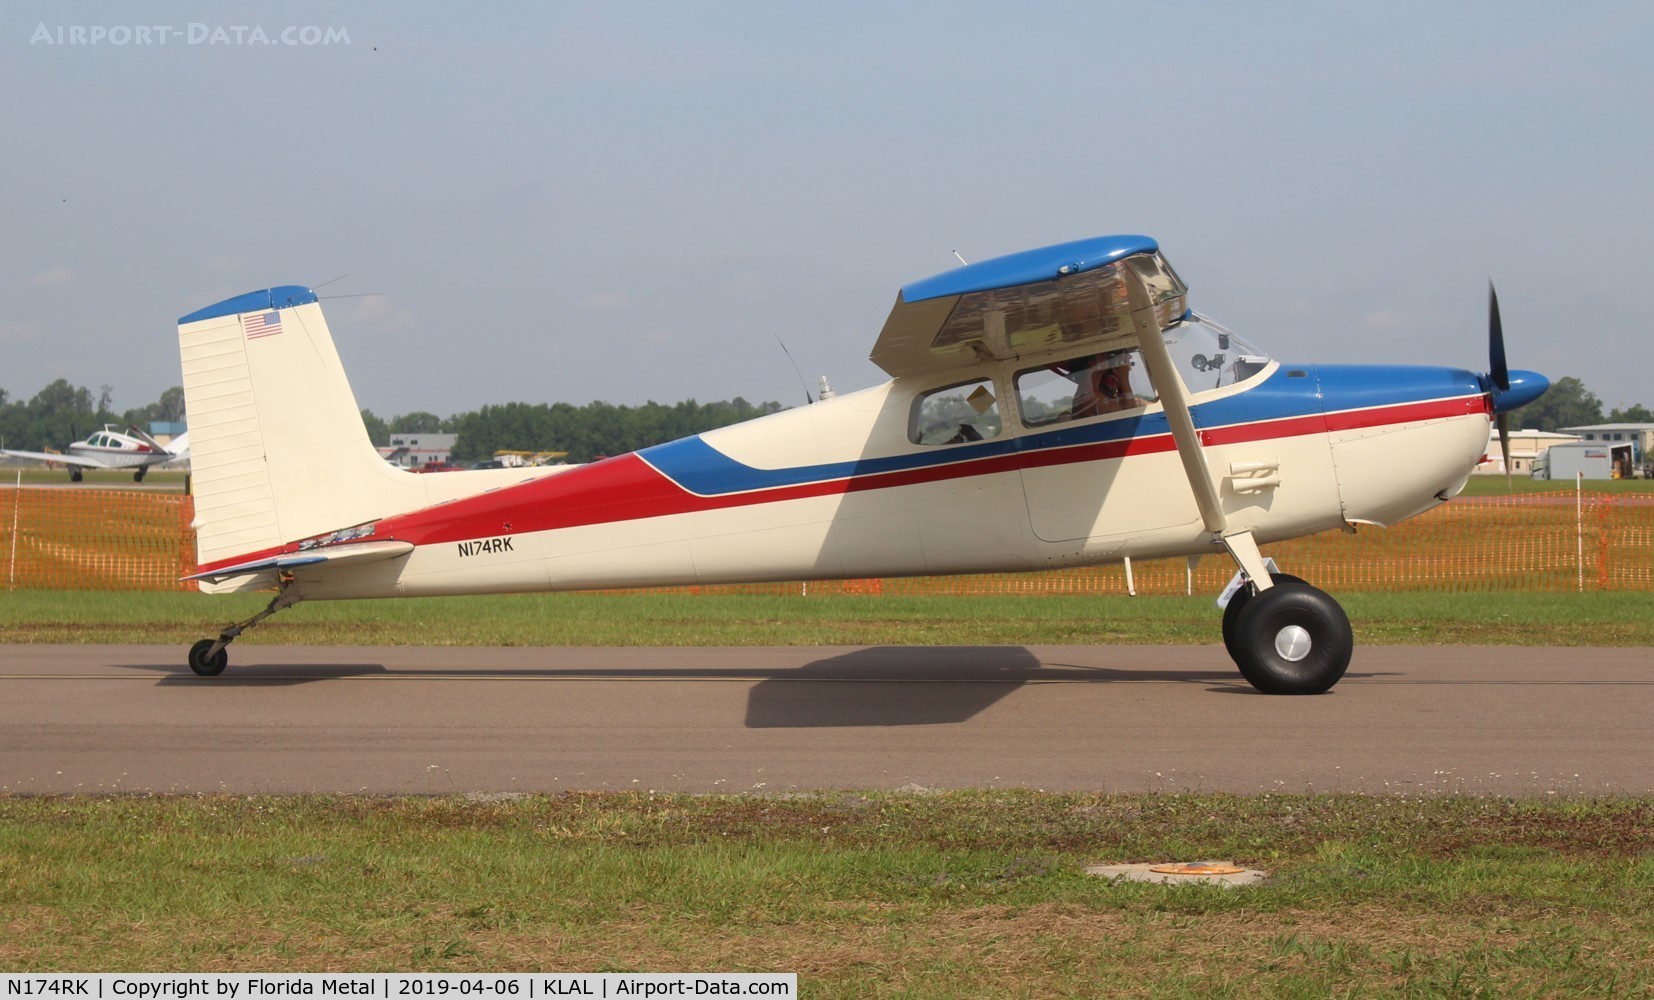 N174RK, 1956 Cessna 172 C/N 29537, Is it a Cessna 170 or a 172 with a tail dragger conversion?  FAA shows it as a 172.  There are some taildragger conversions for later model 172s